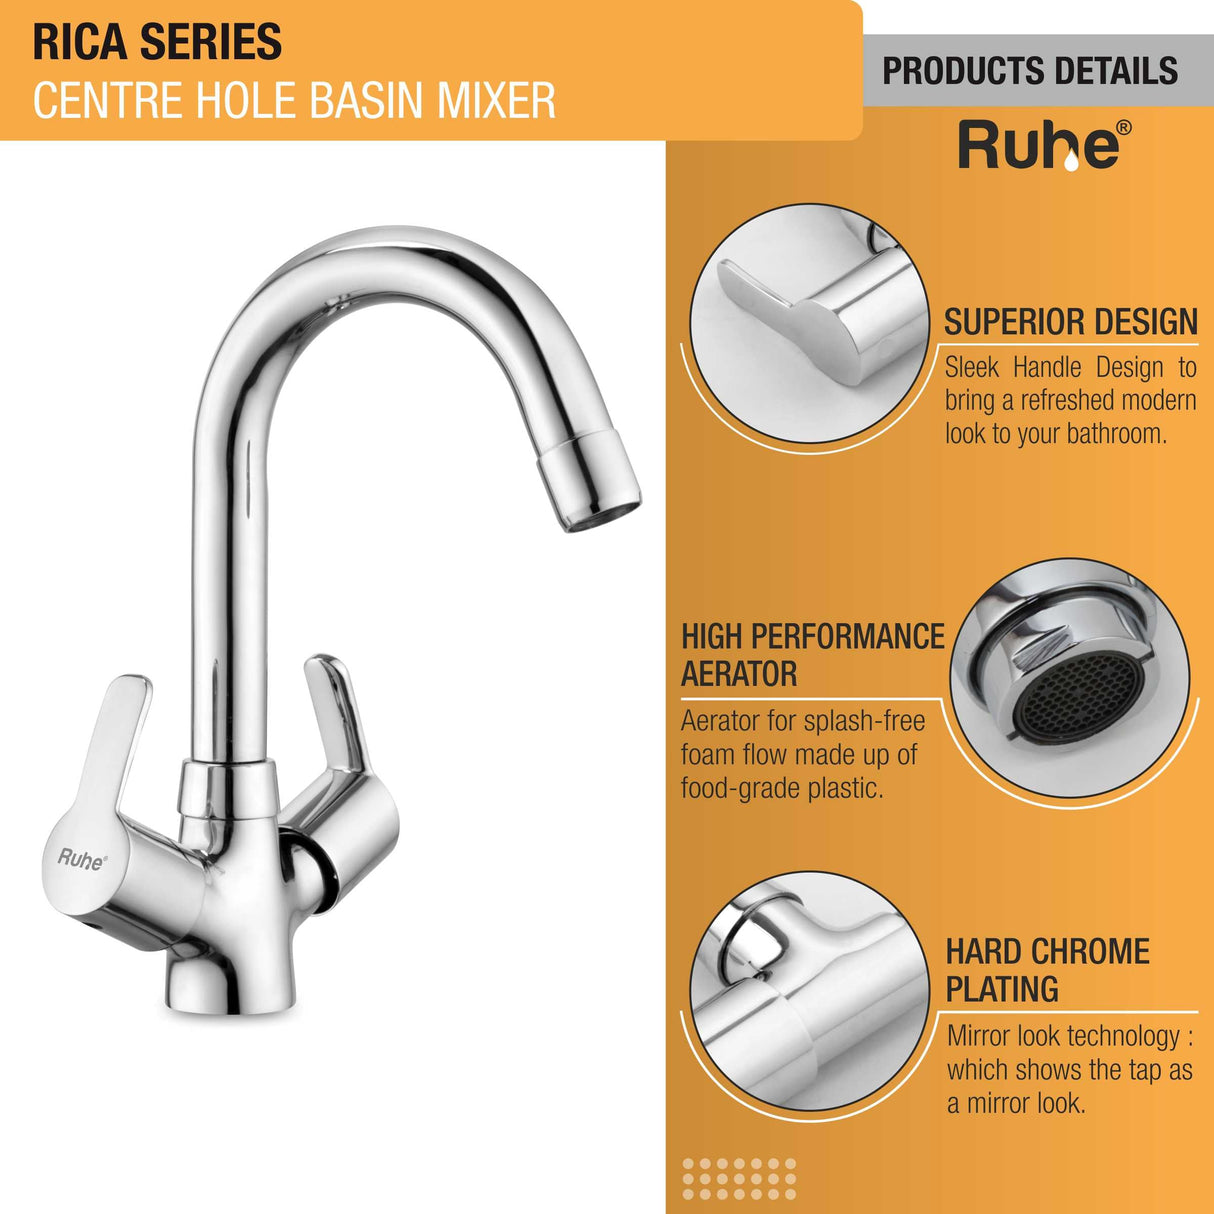 Rica Centre Hole Basin Mixer with Small (12 inches) Round Swivel Spout Faucet product details